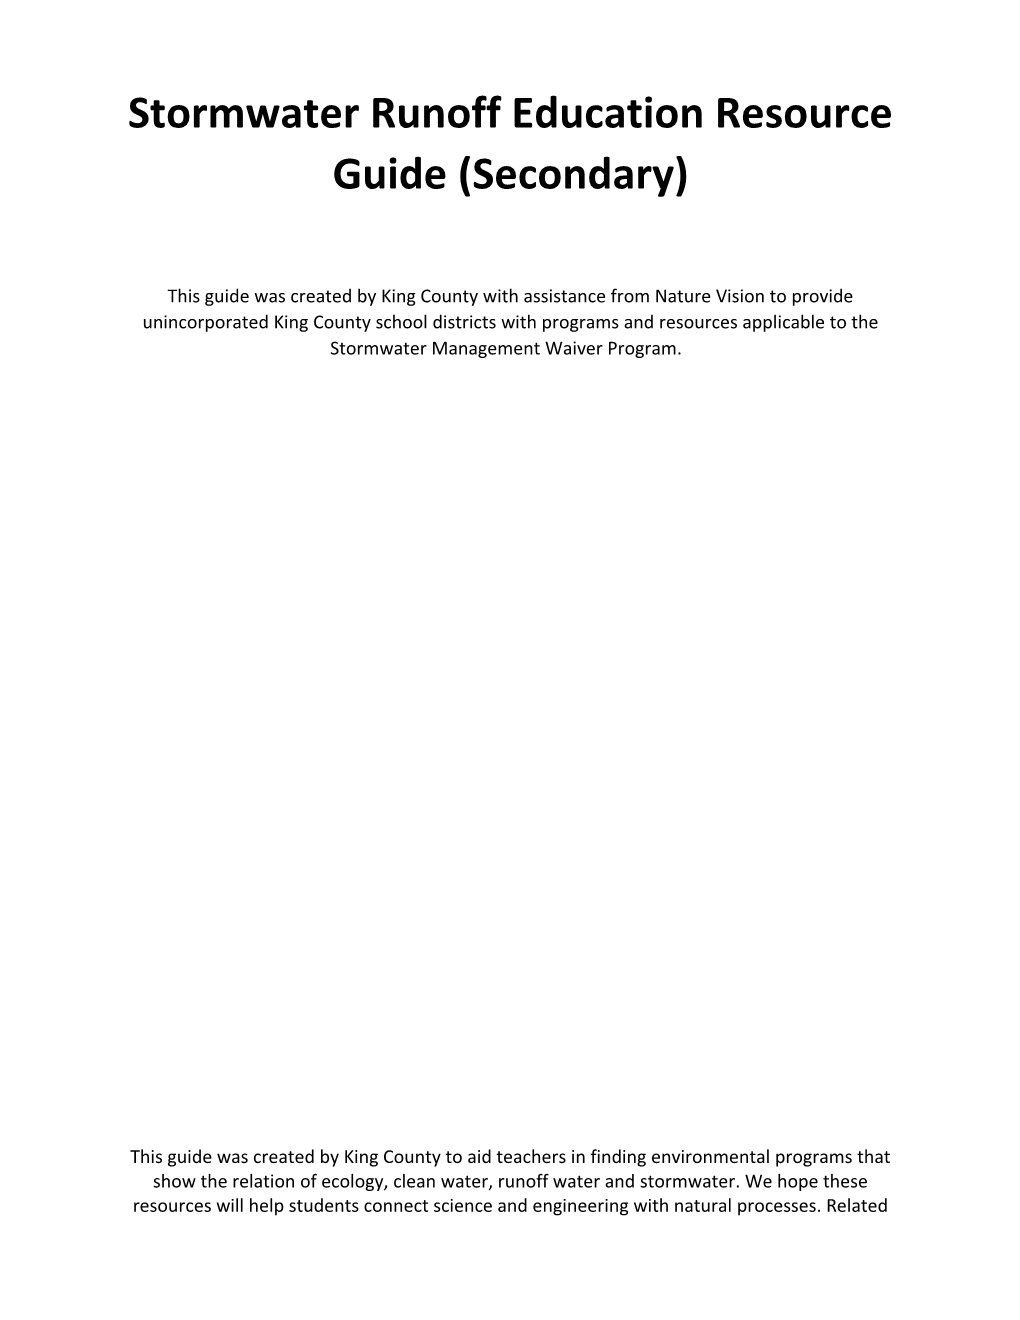 Stormwater Runoff Education Resource Guide (Secondary)